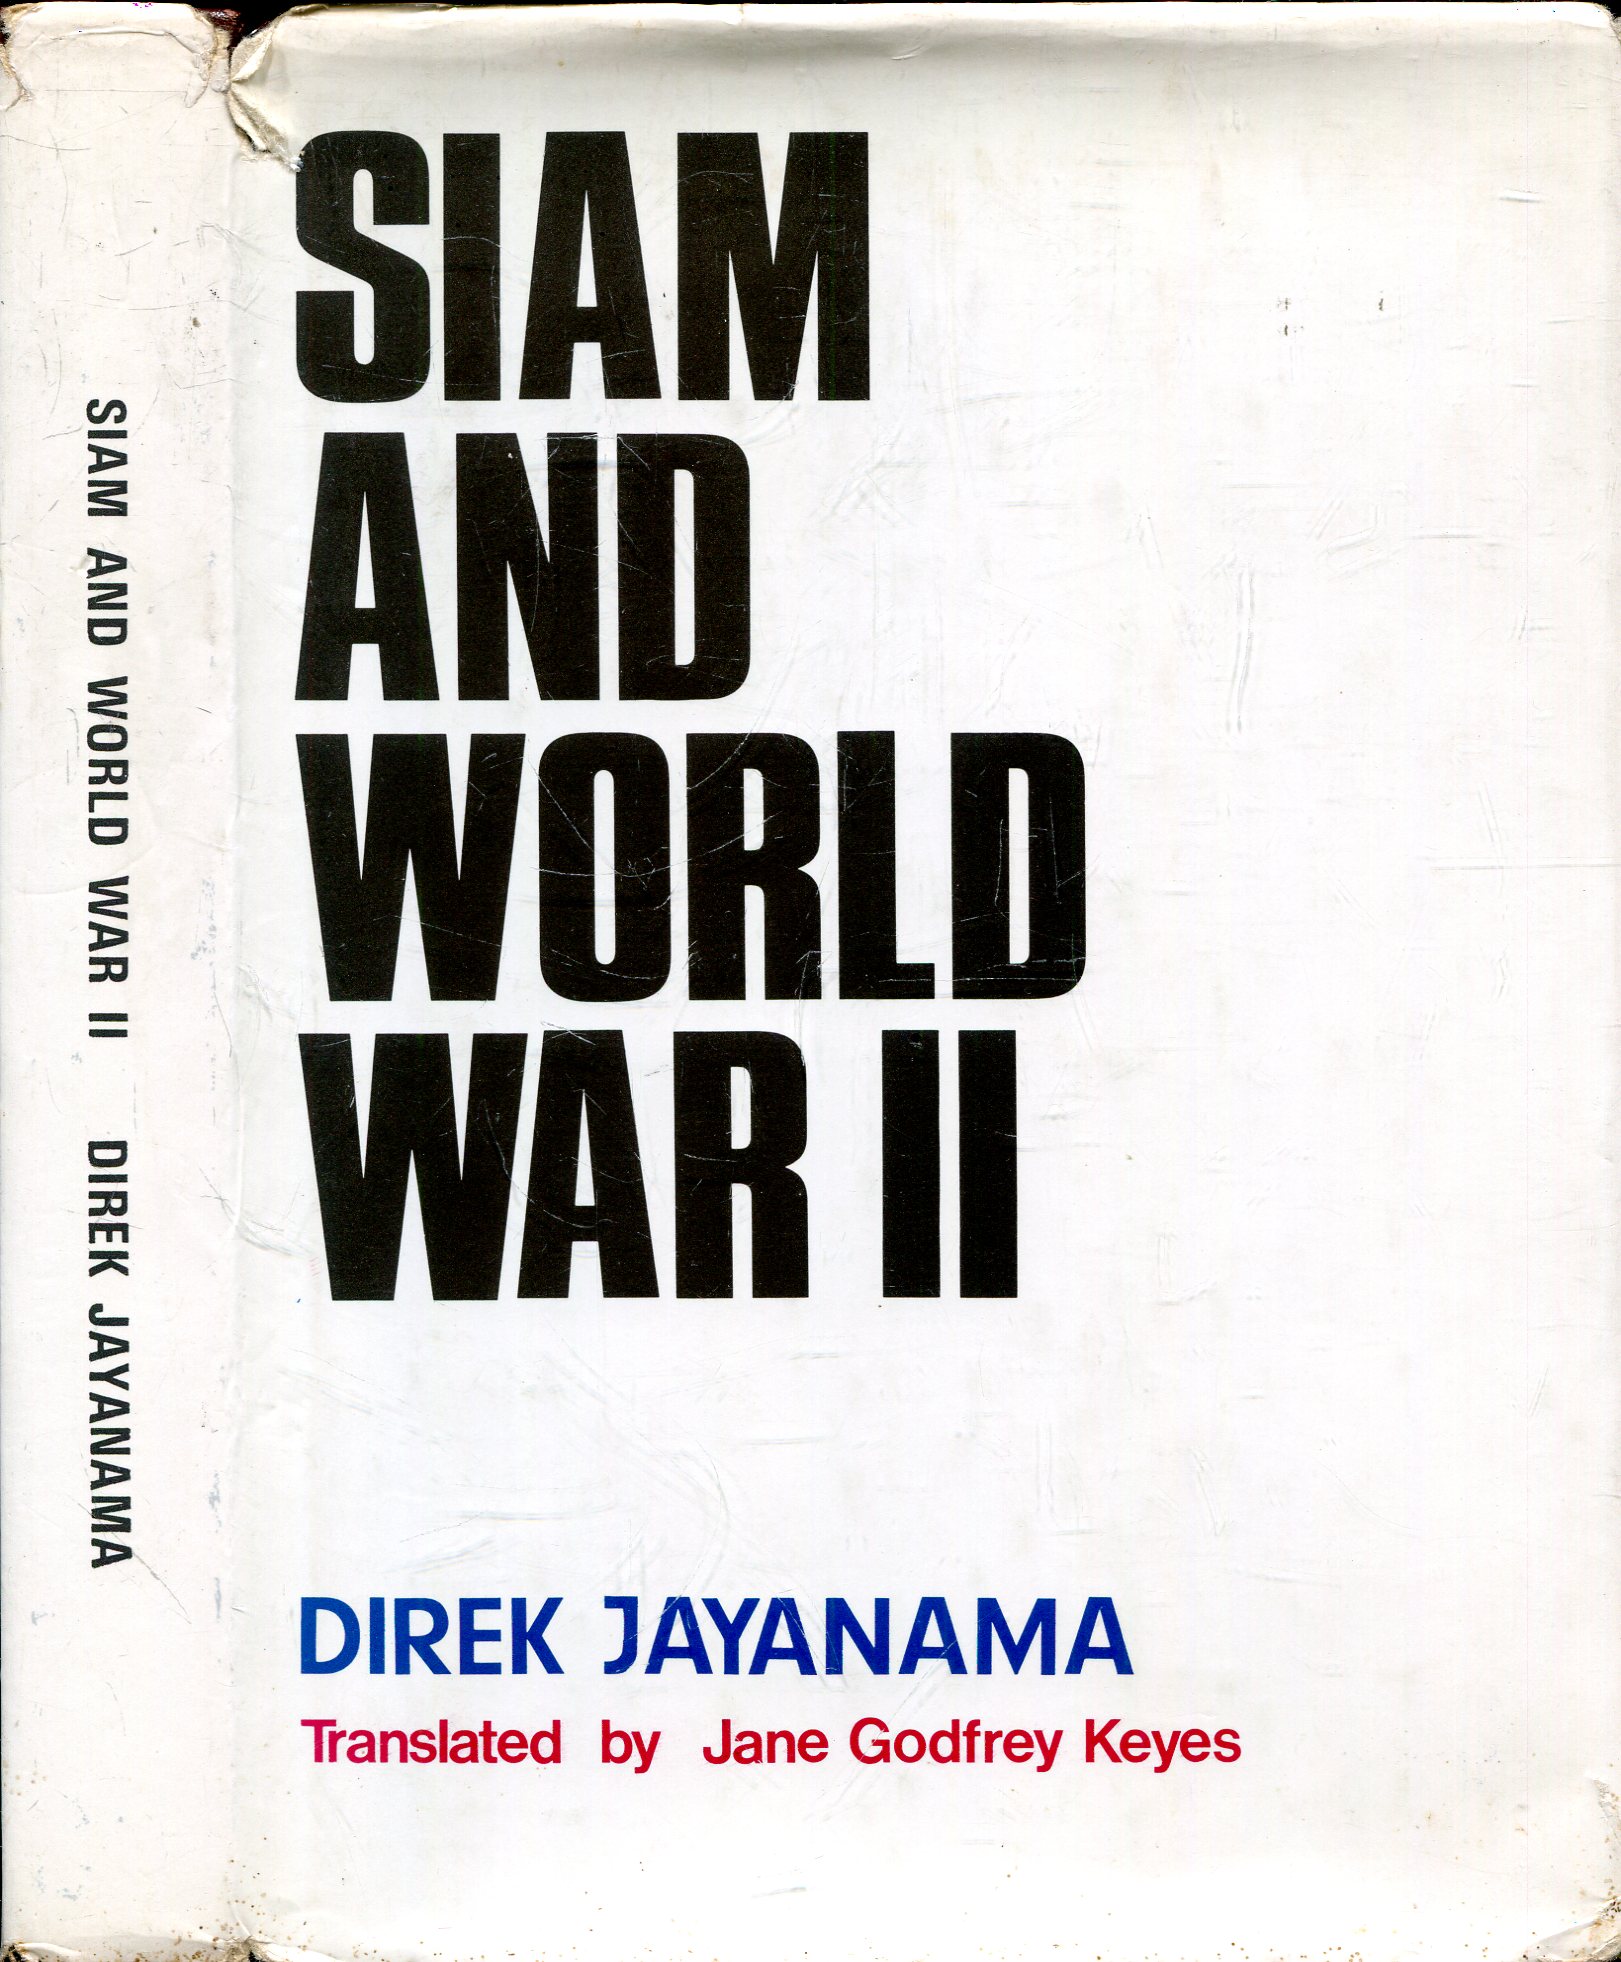 Image for Siam and World War II